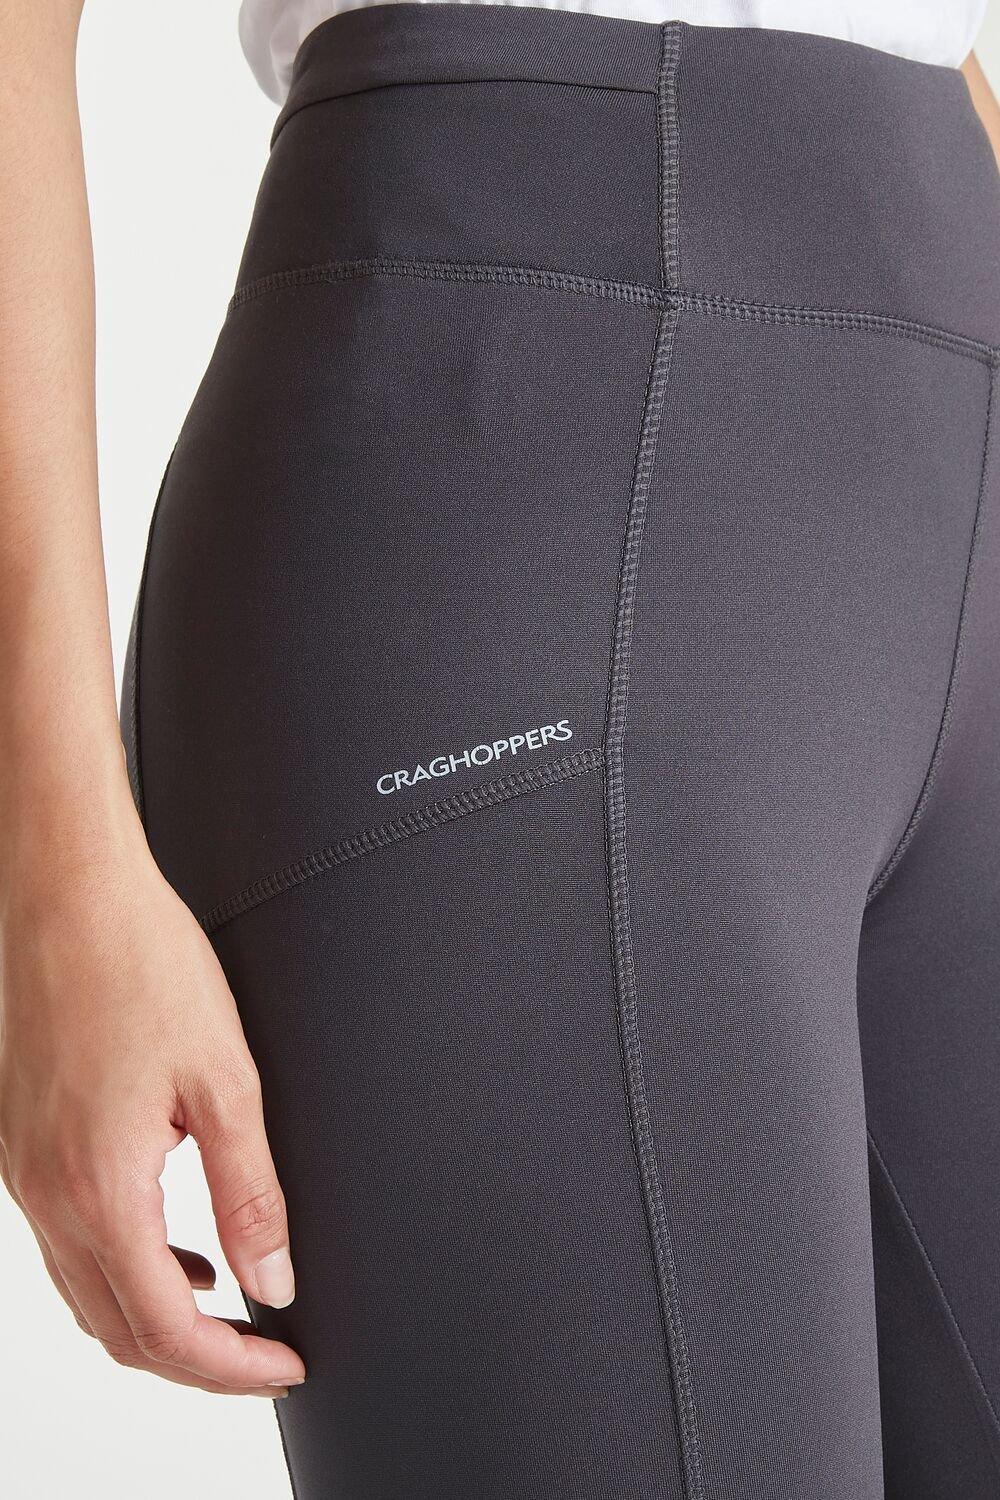 Craghoppers Craghoppers Winter Trekking Thermal Leggings Dark Navy L UK 12 New With Tags 